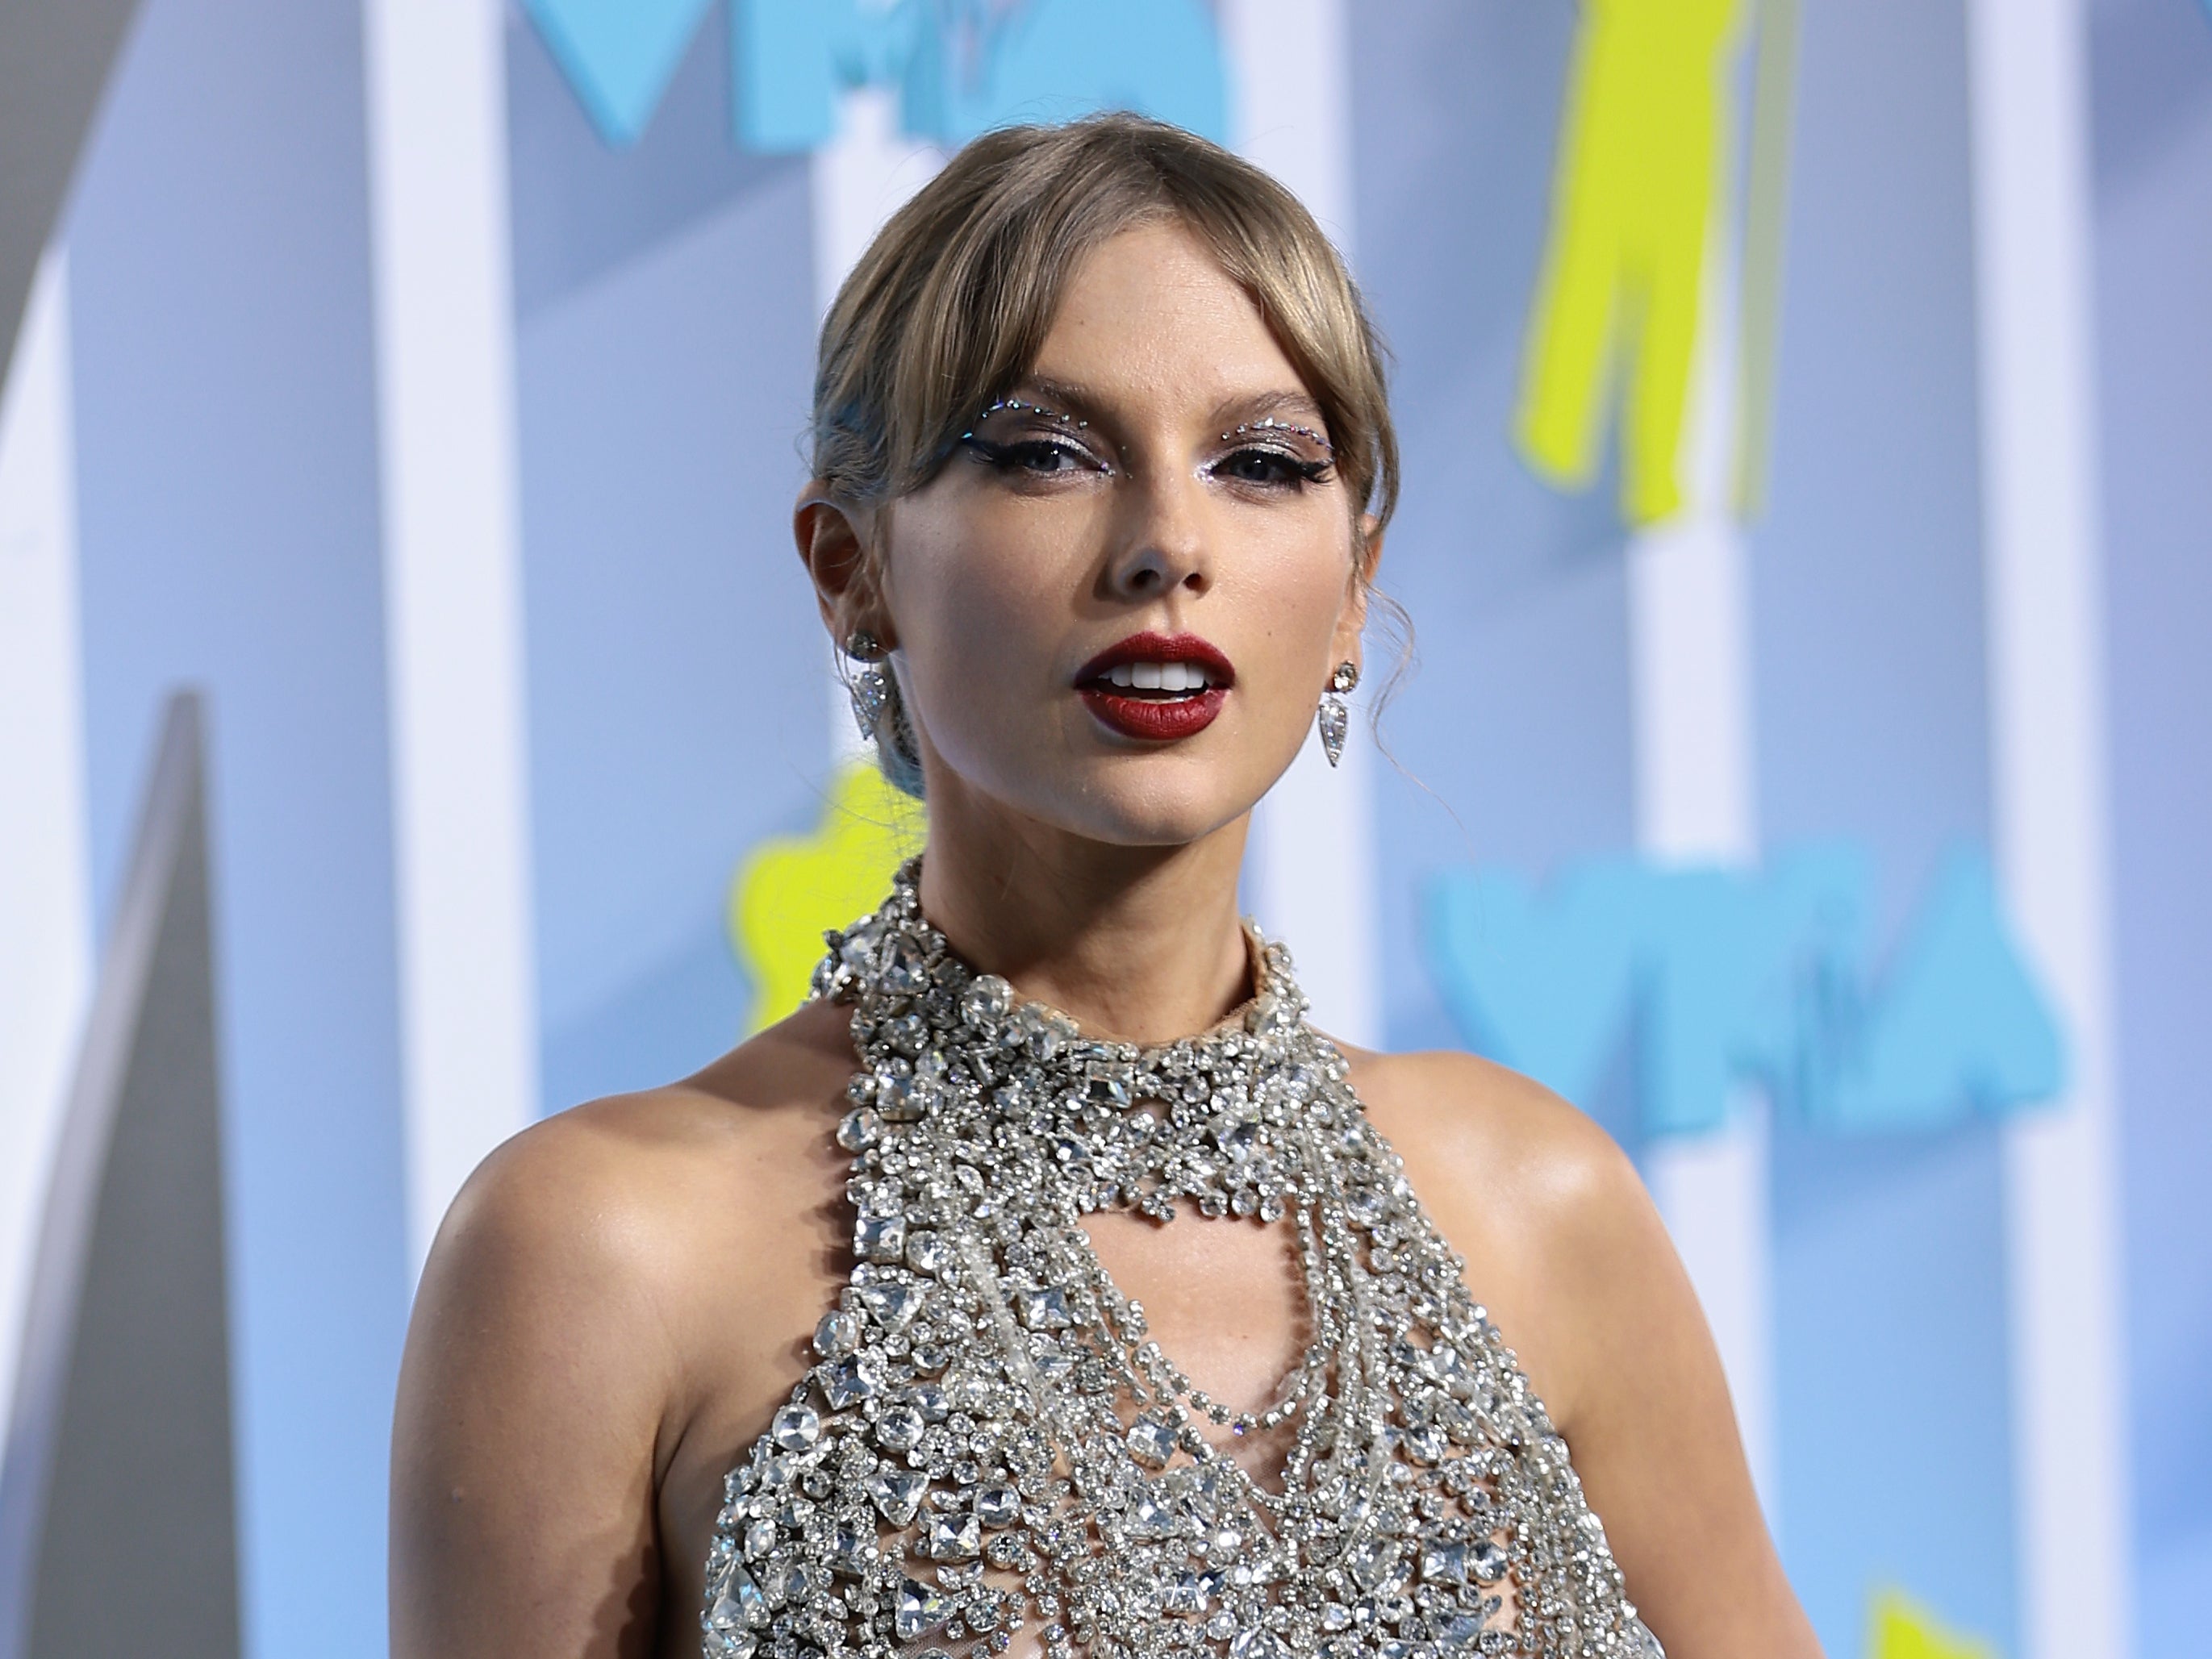 Taylor Swift releases ‘Midnights’ in October